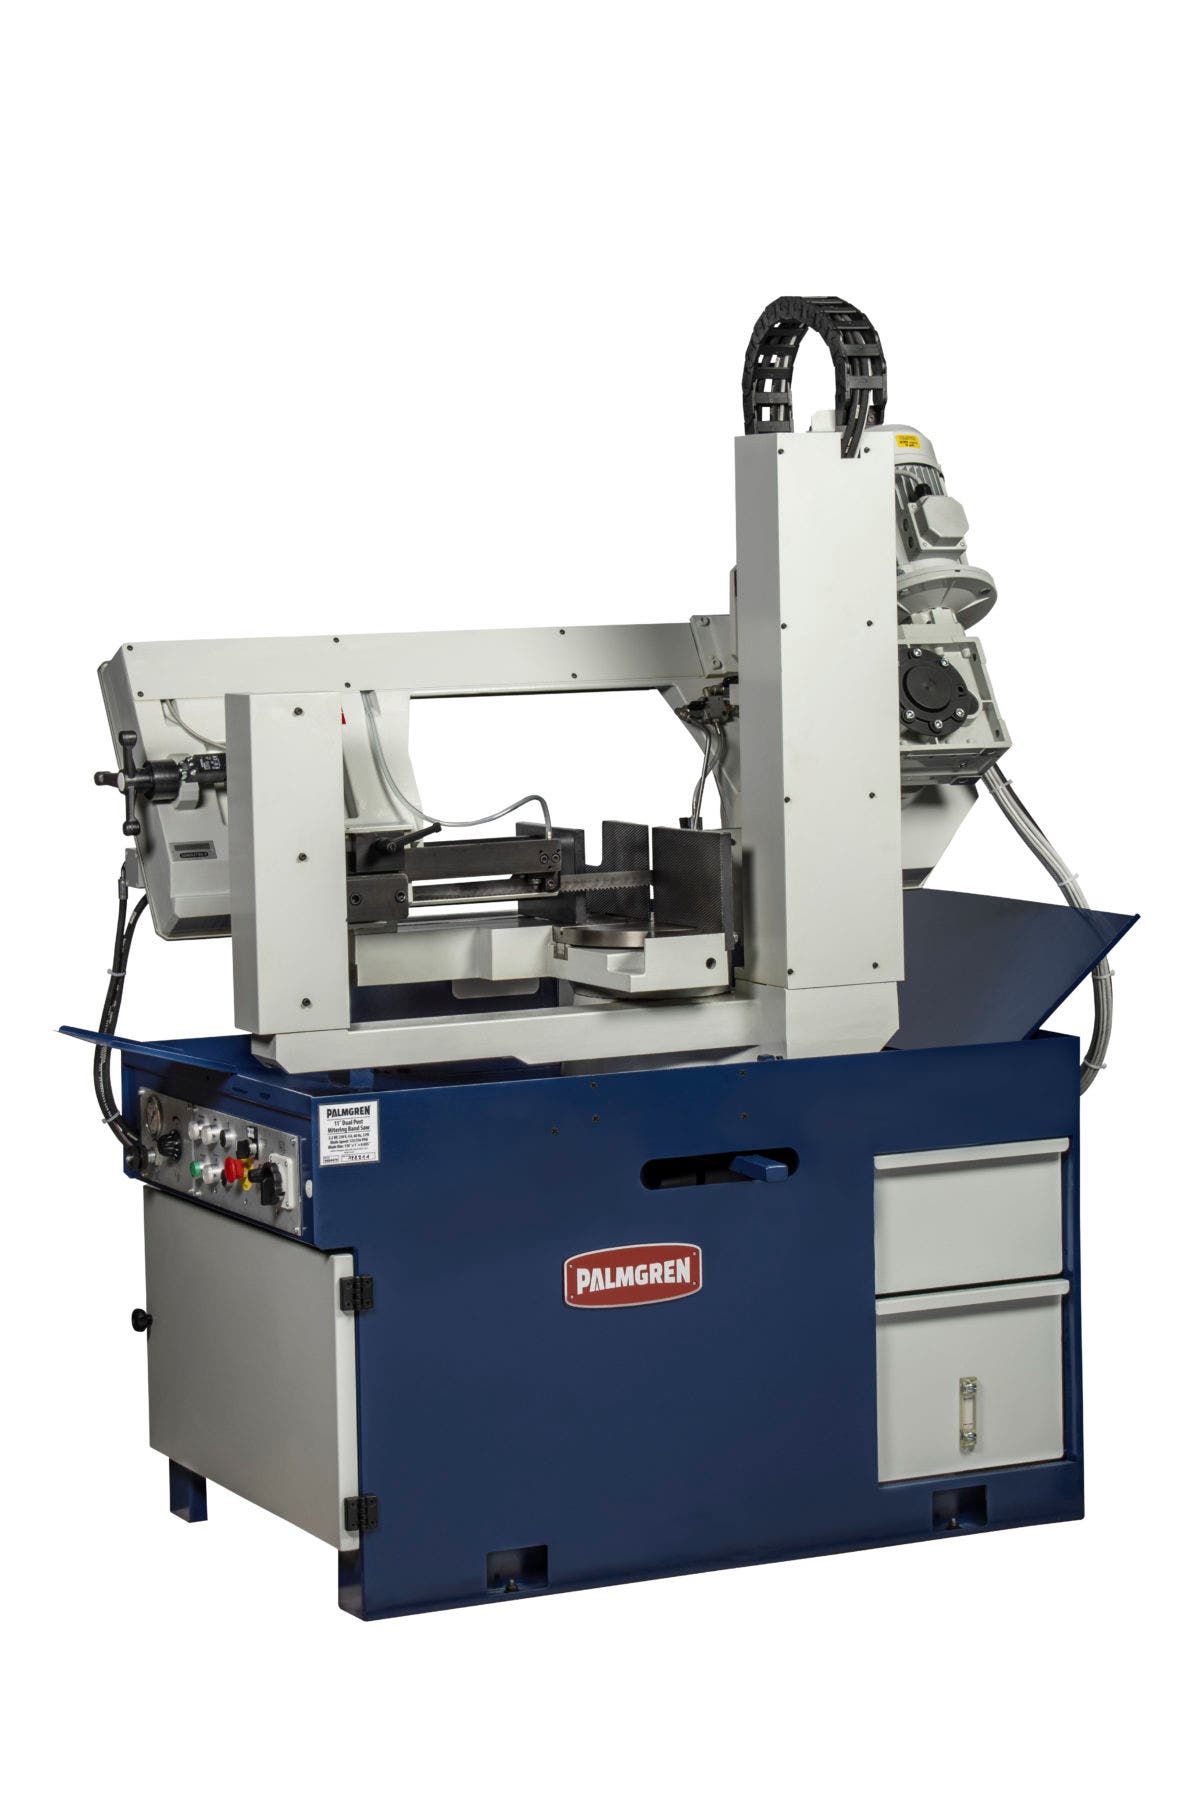 What You Need to Know About Palmgren’s® New 11” Semi-Auto Band Saw